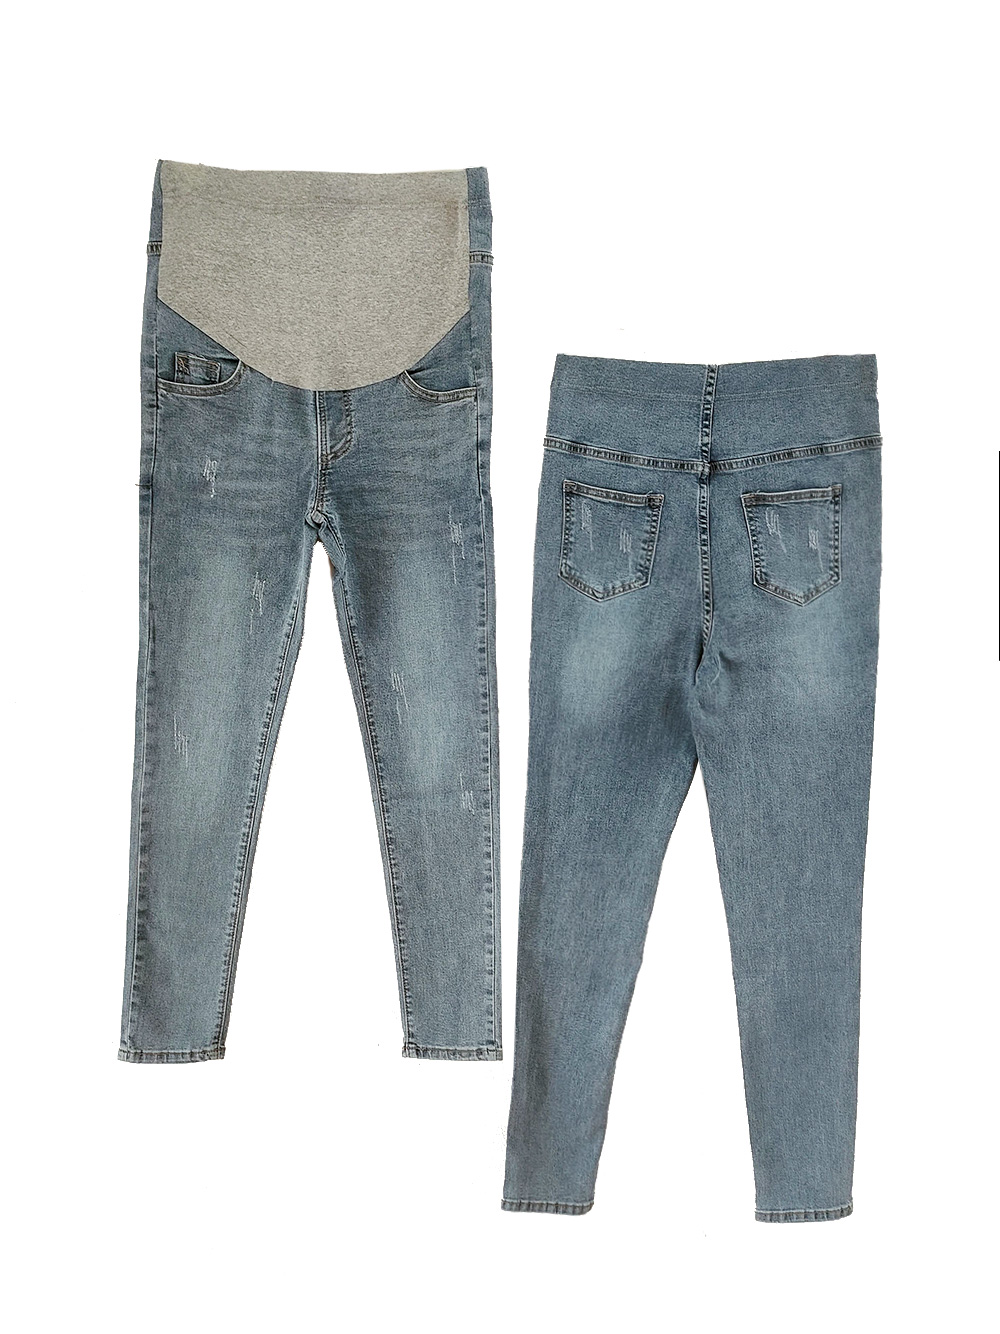 PA14155 Rustic Chic Jeans - Momstobeshop.com